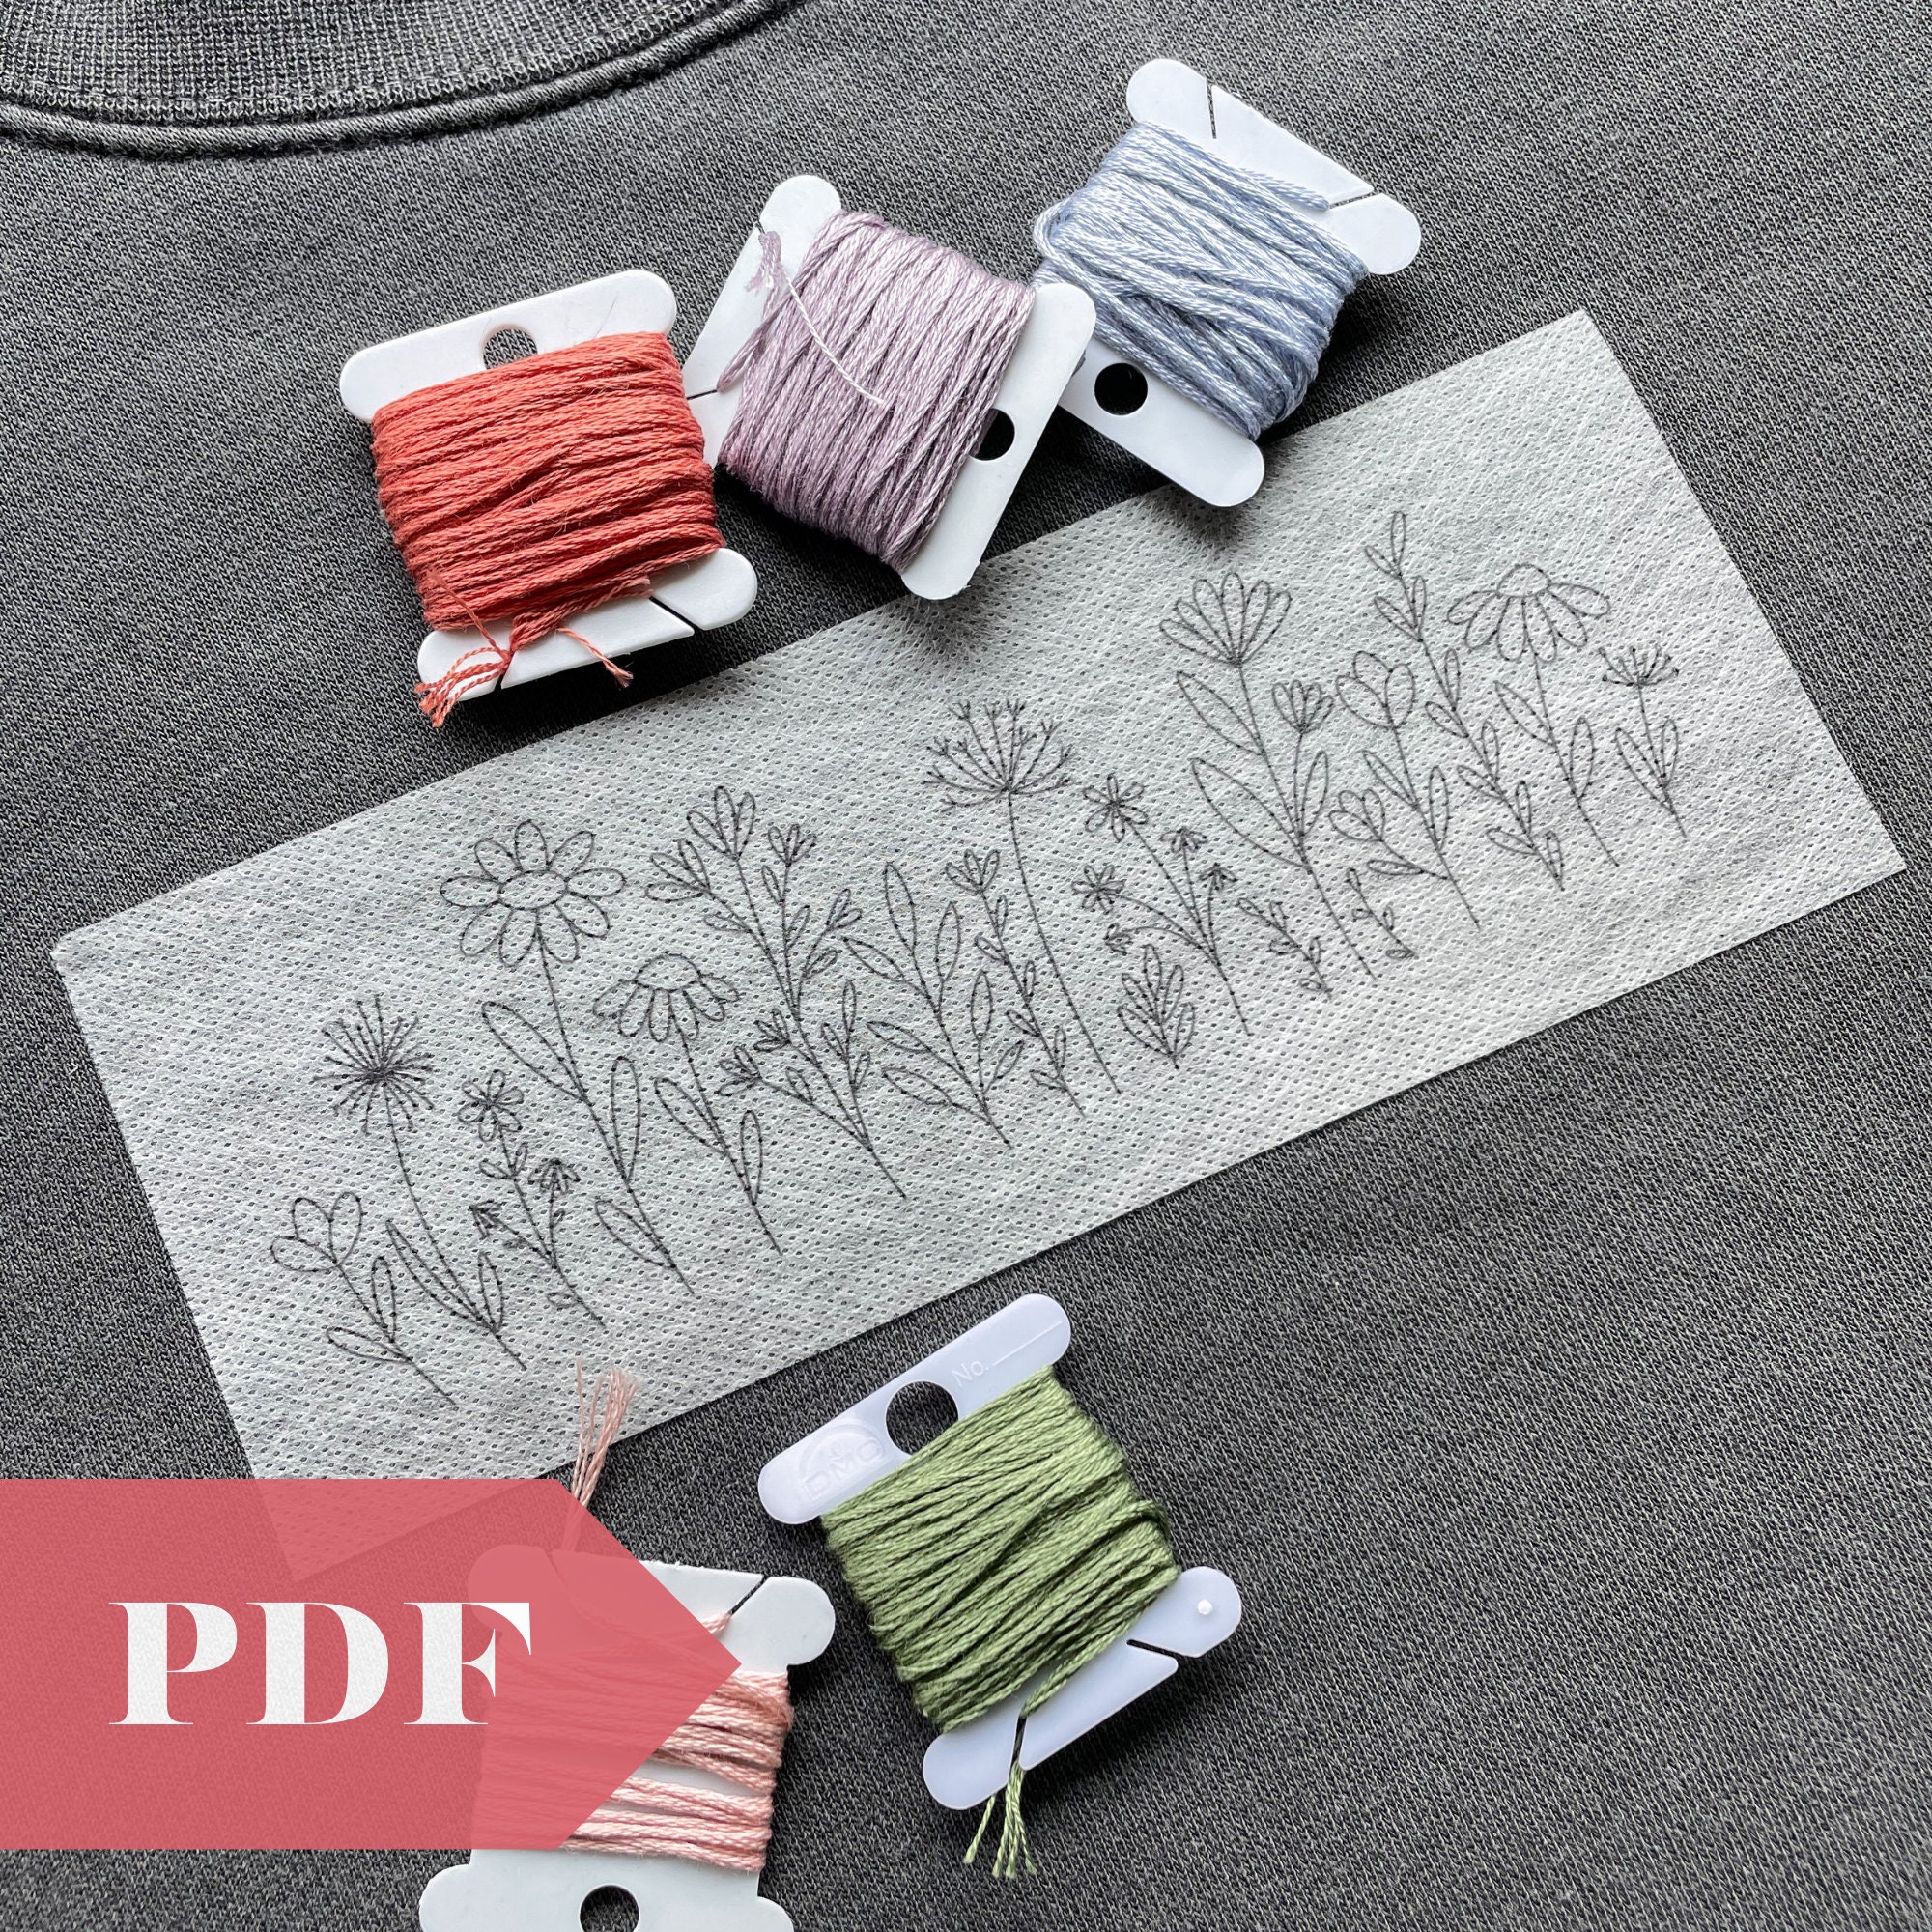 Embroidery Transfer Paper, Patterned Transfer Paper, Manual DIY